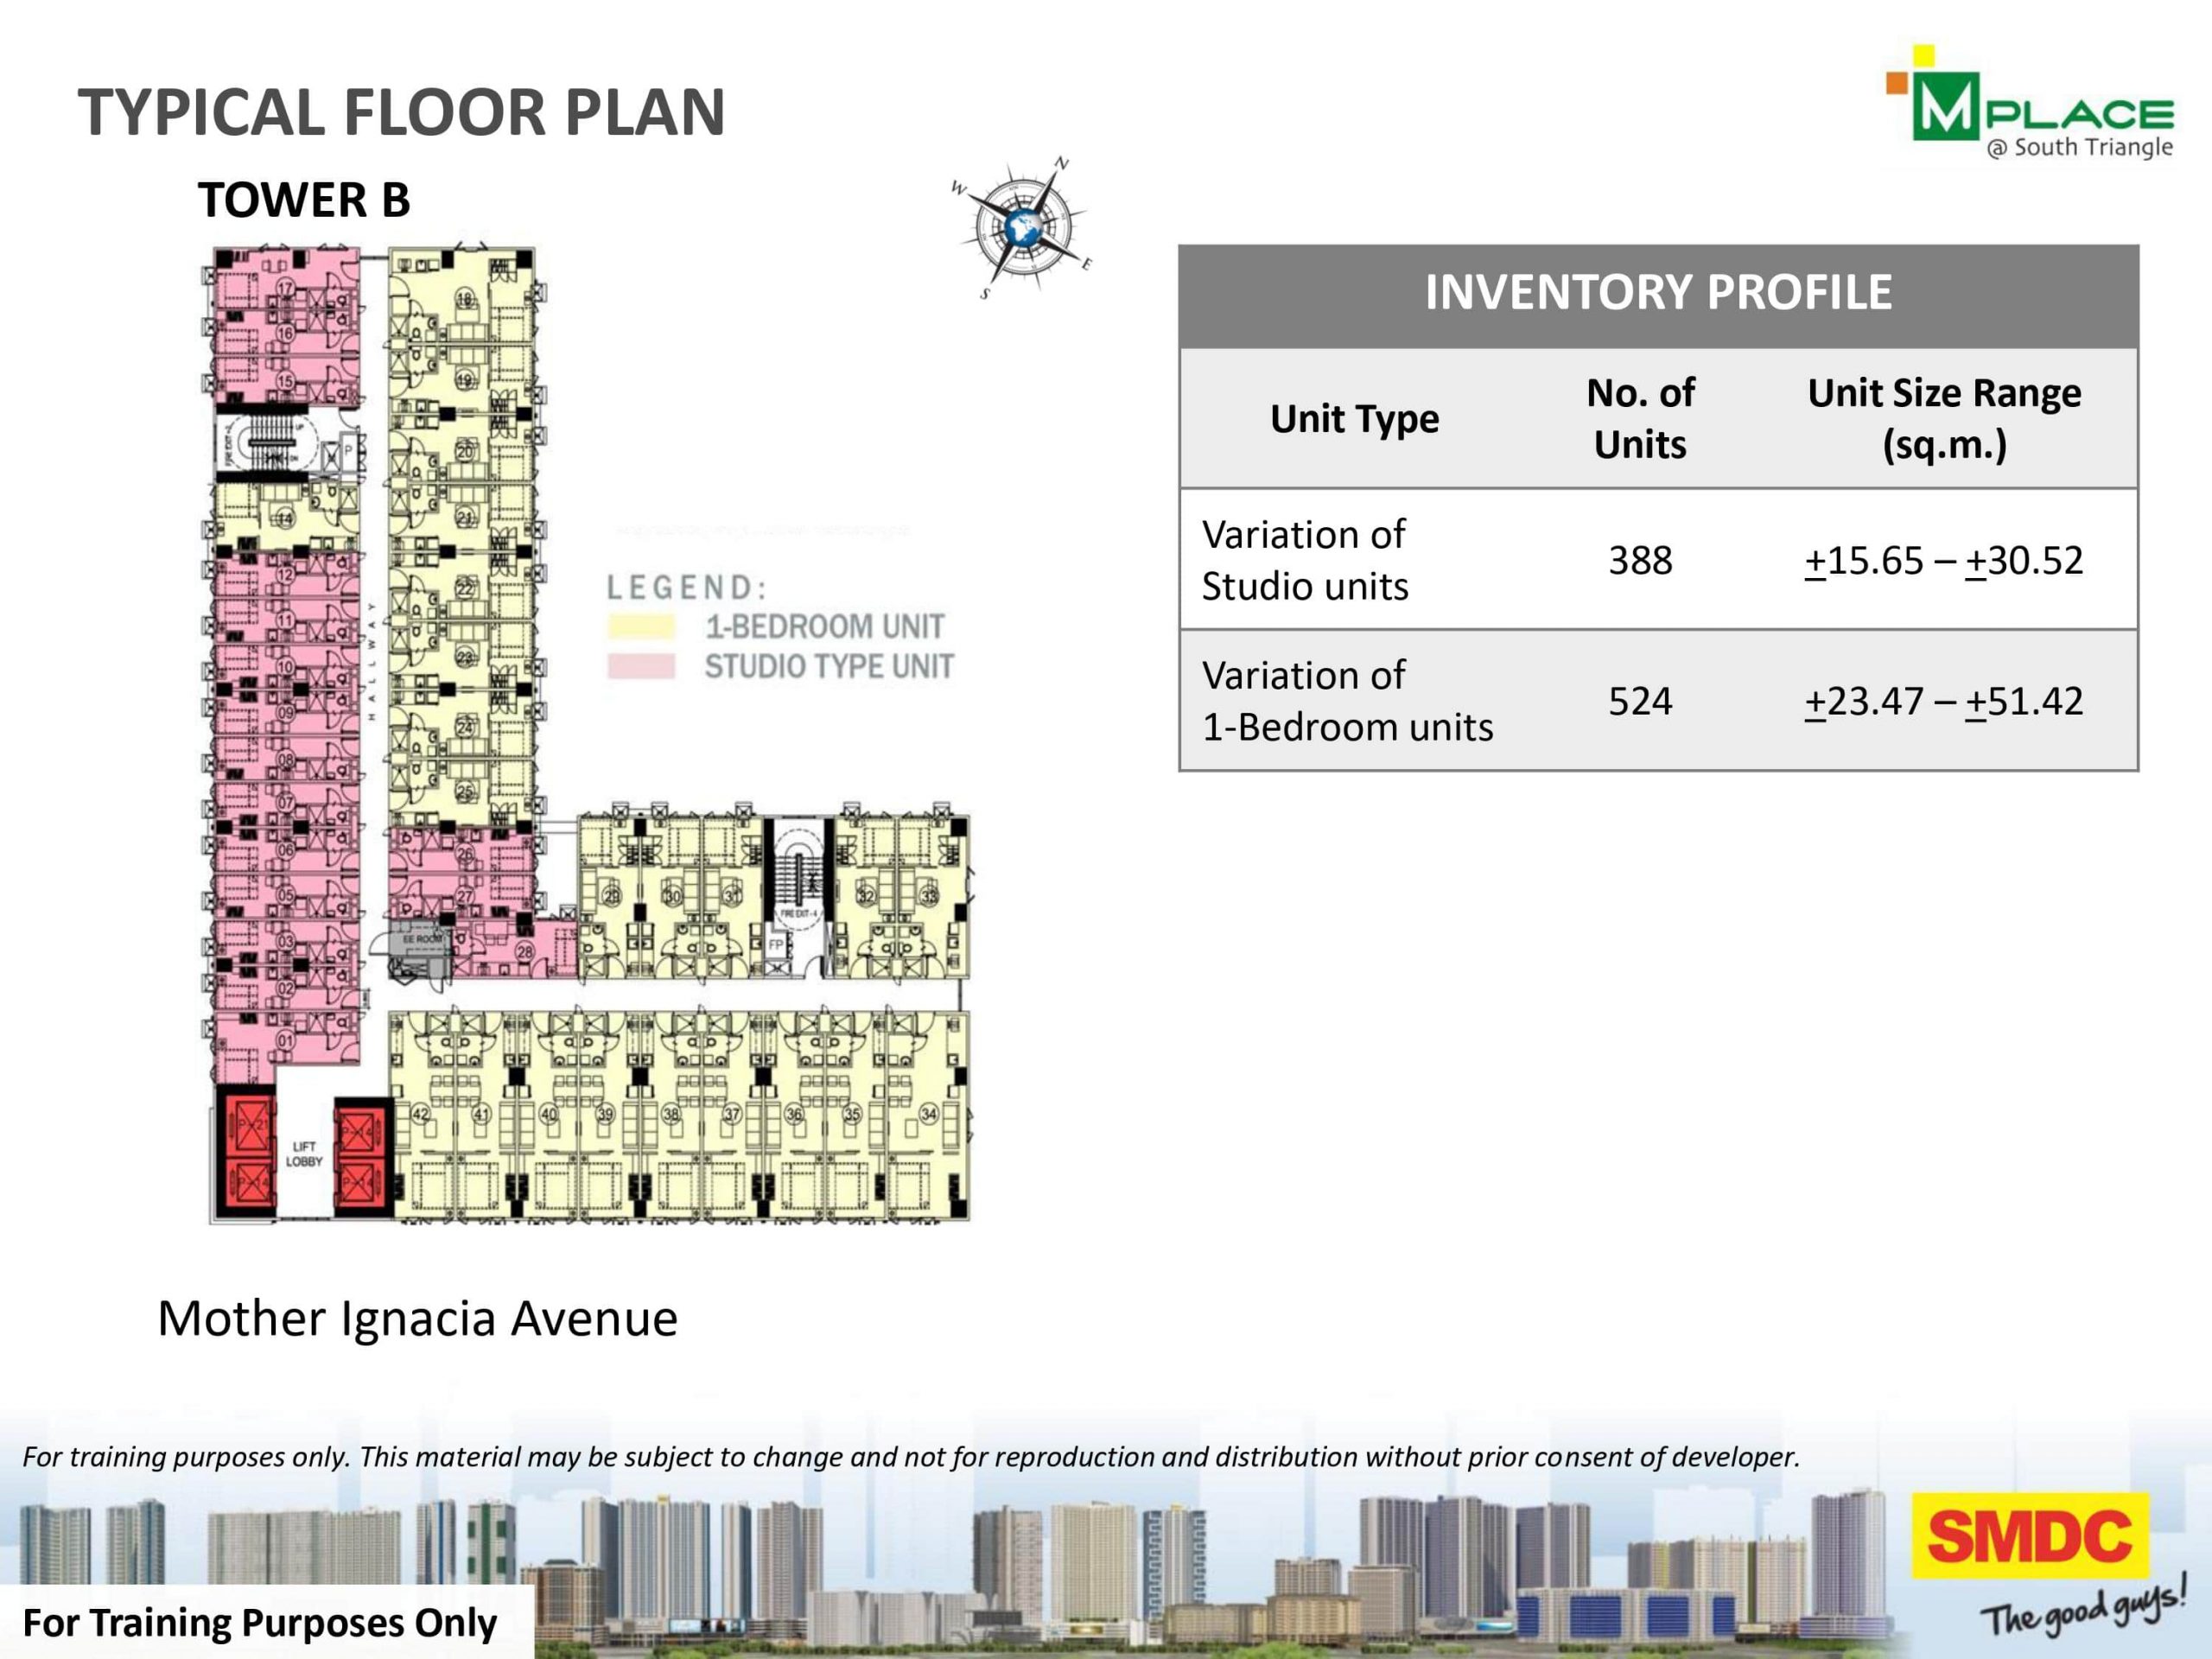 Tower B Typical Floor Plan